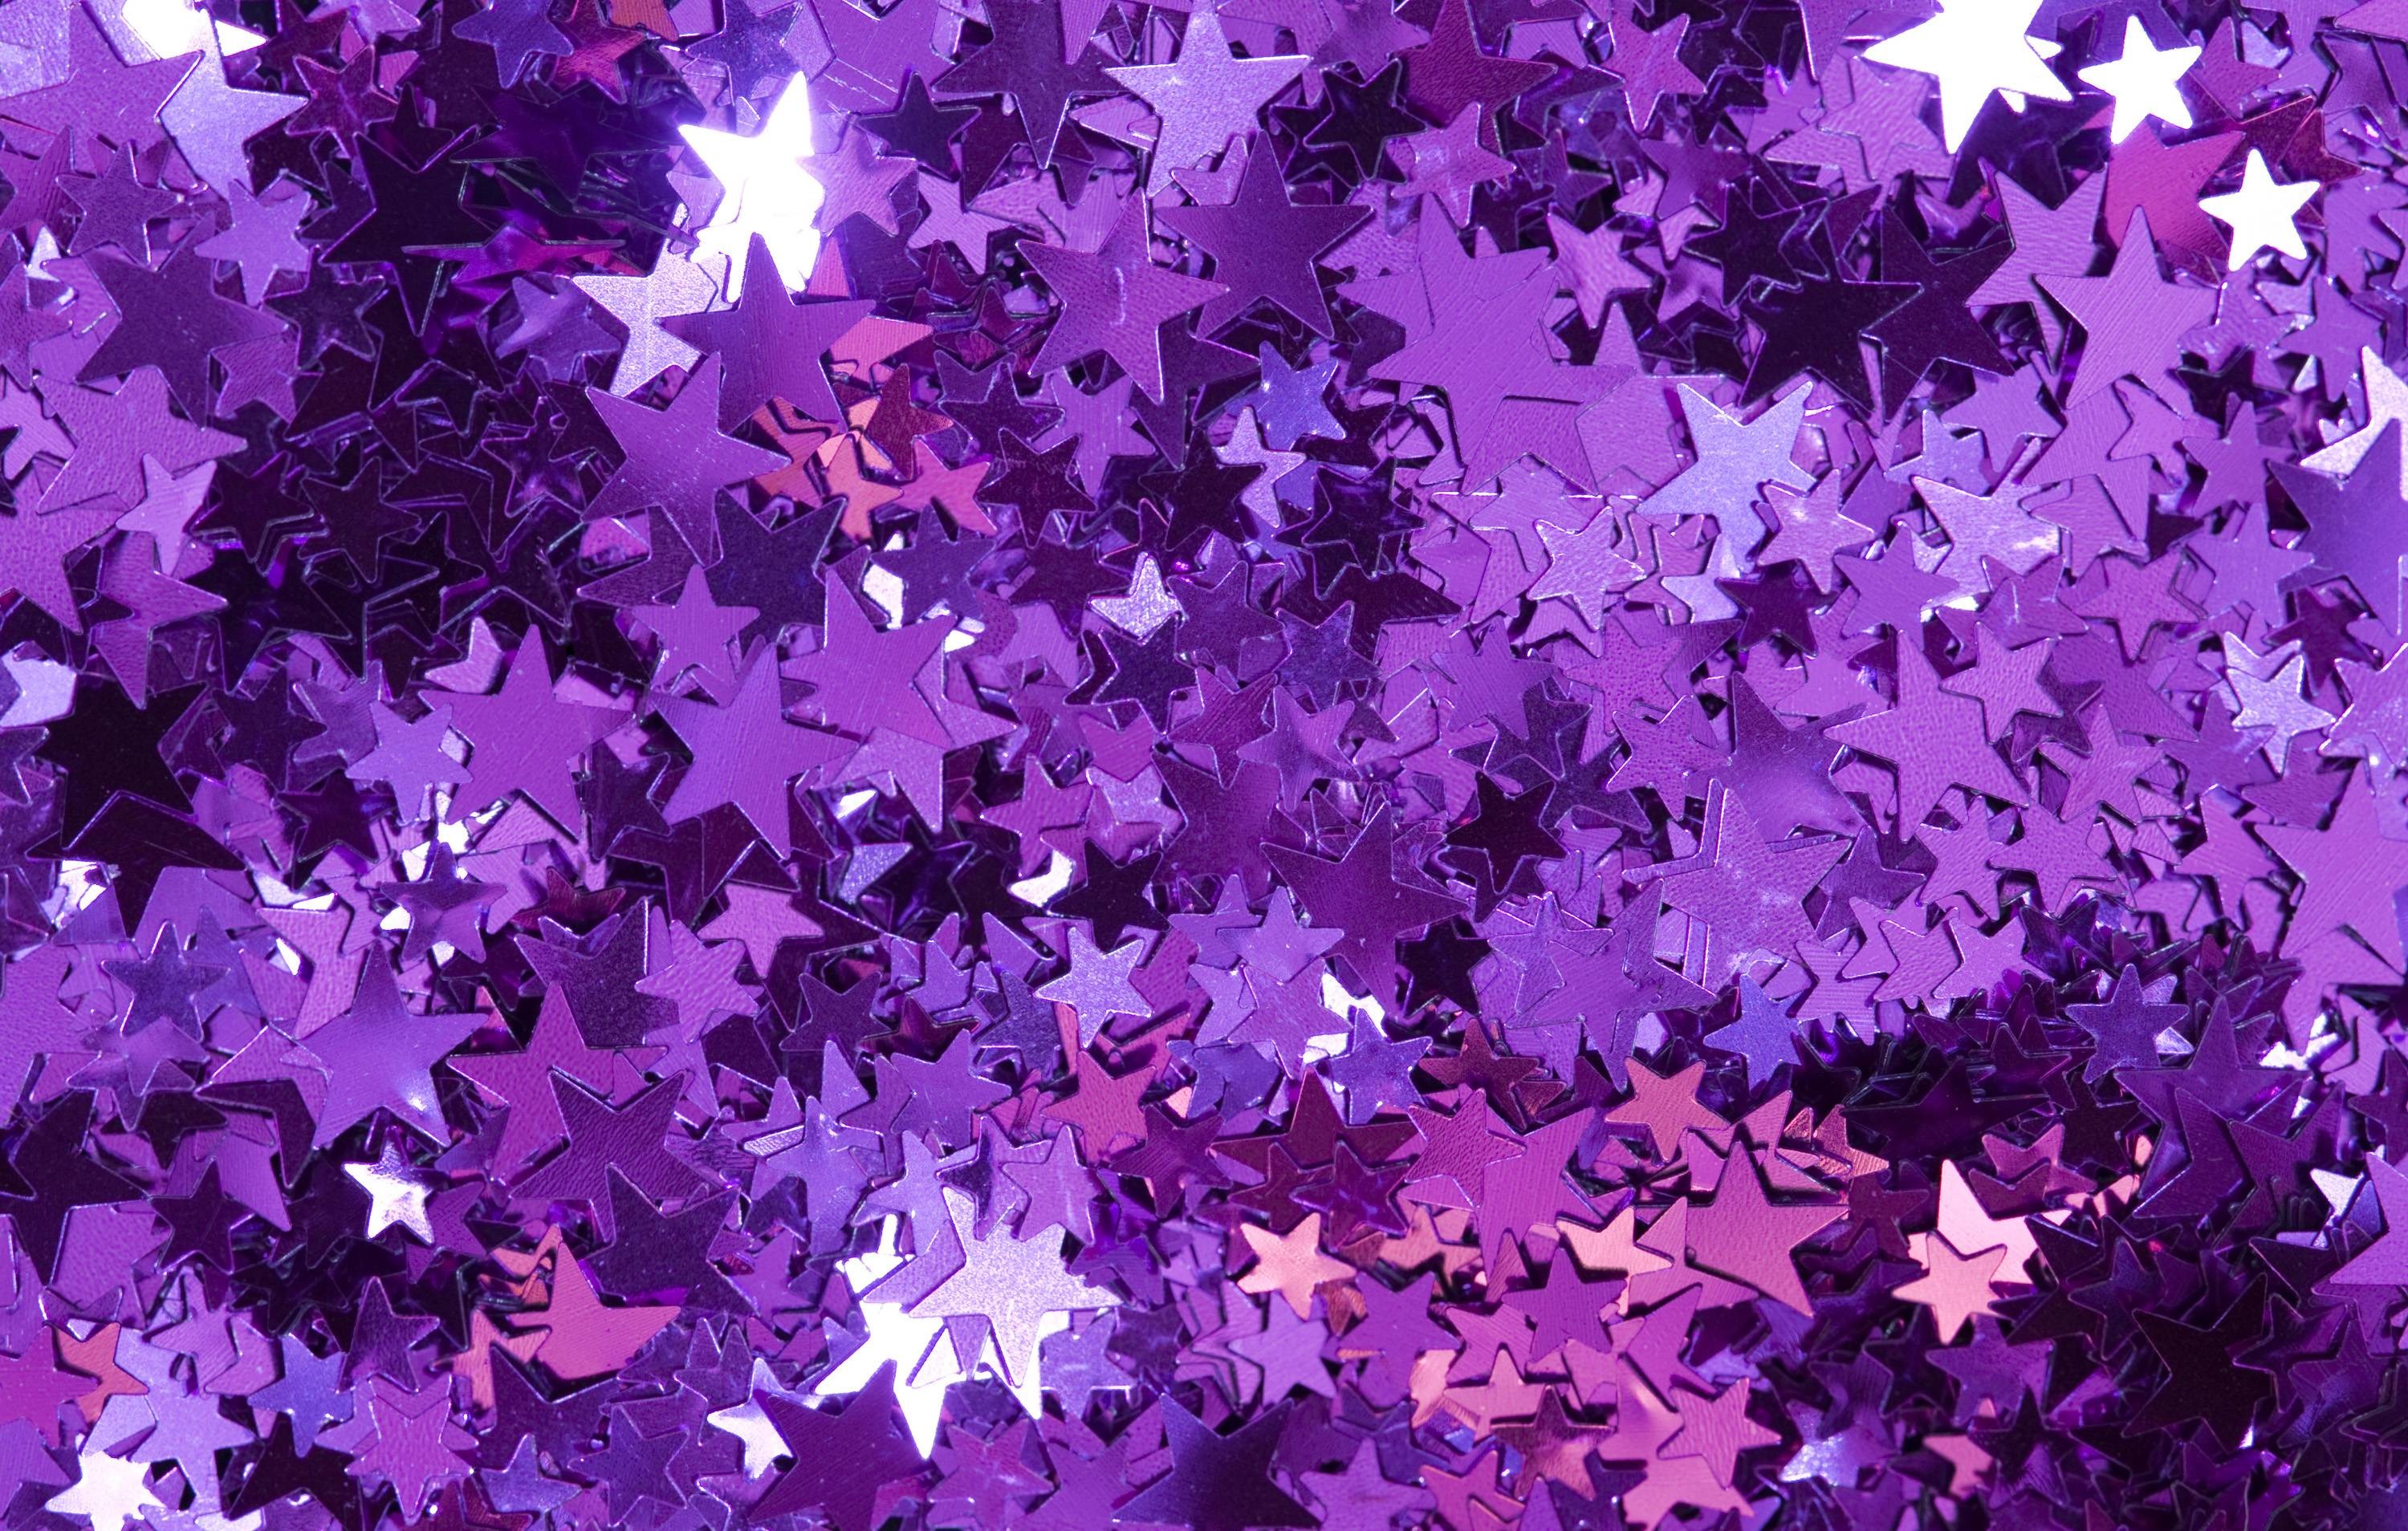 3000x1908 Glitter Background 14 344427 High Definition Wallpapers| wallalay.